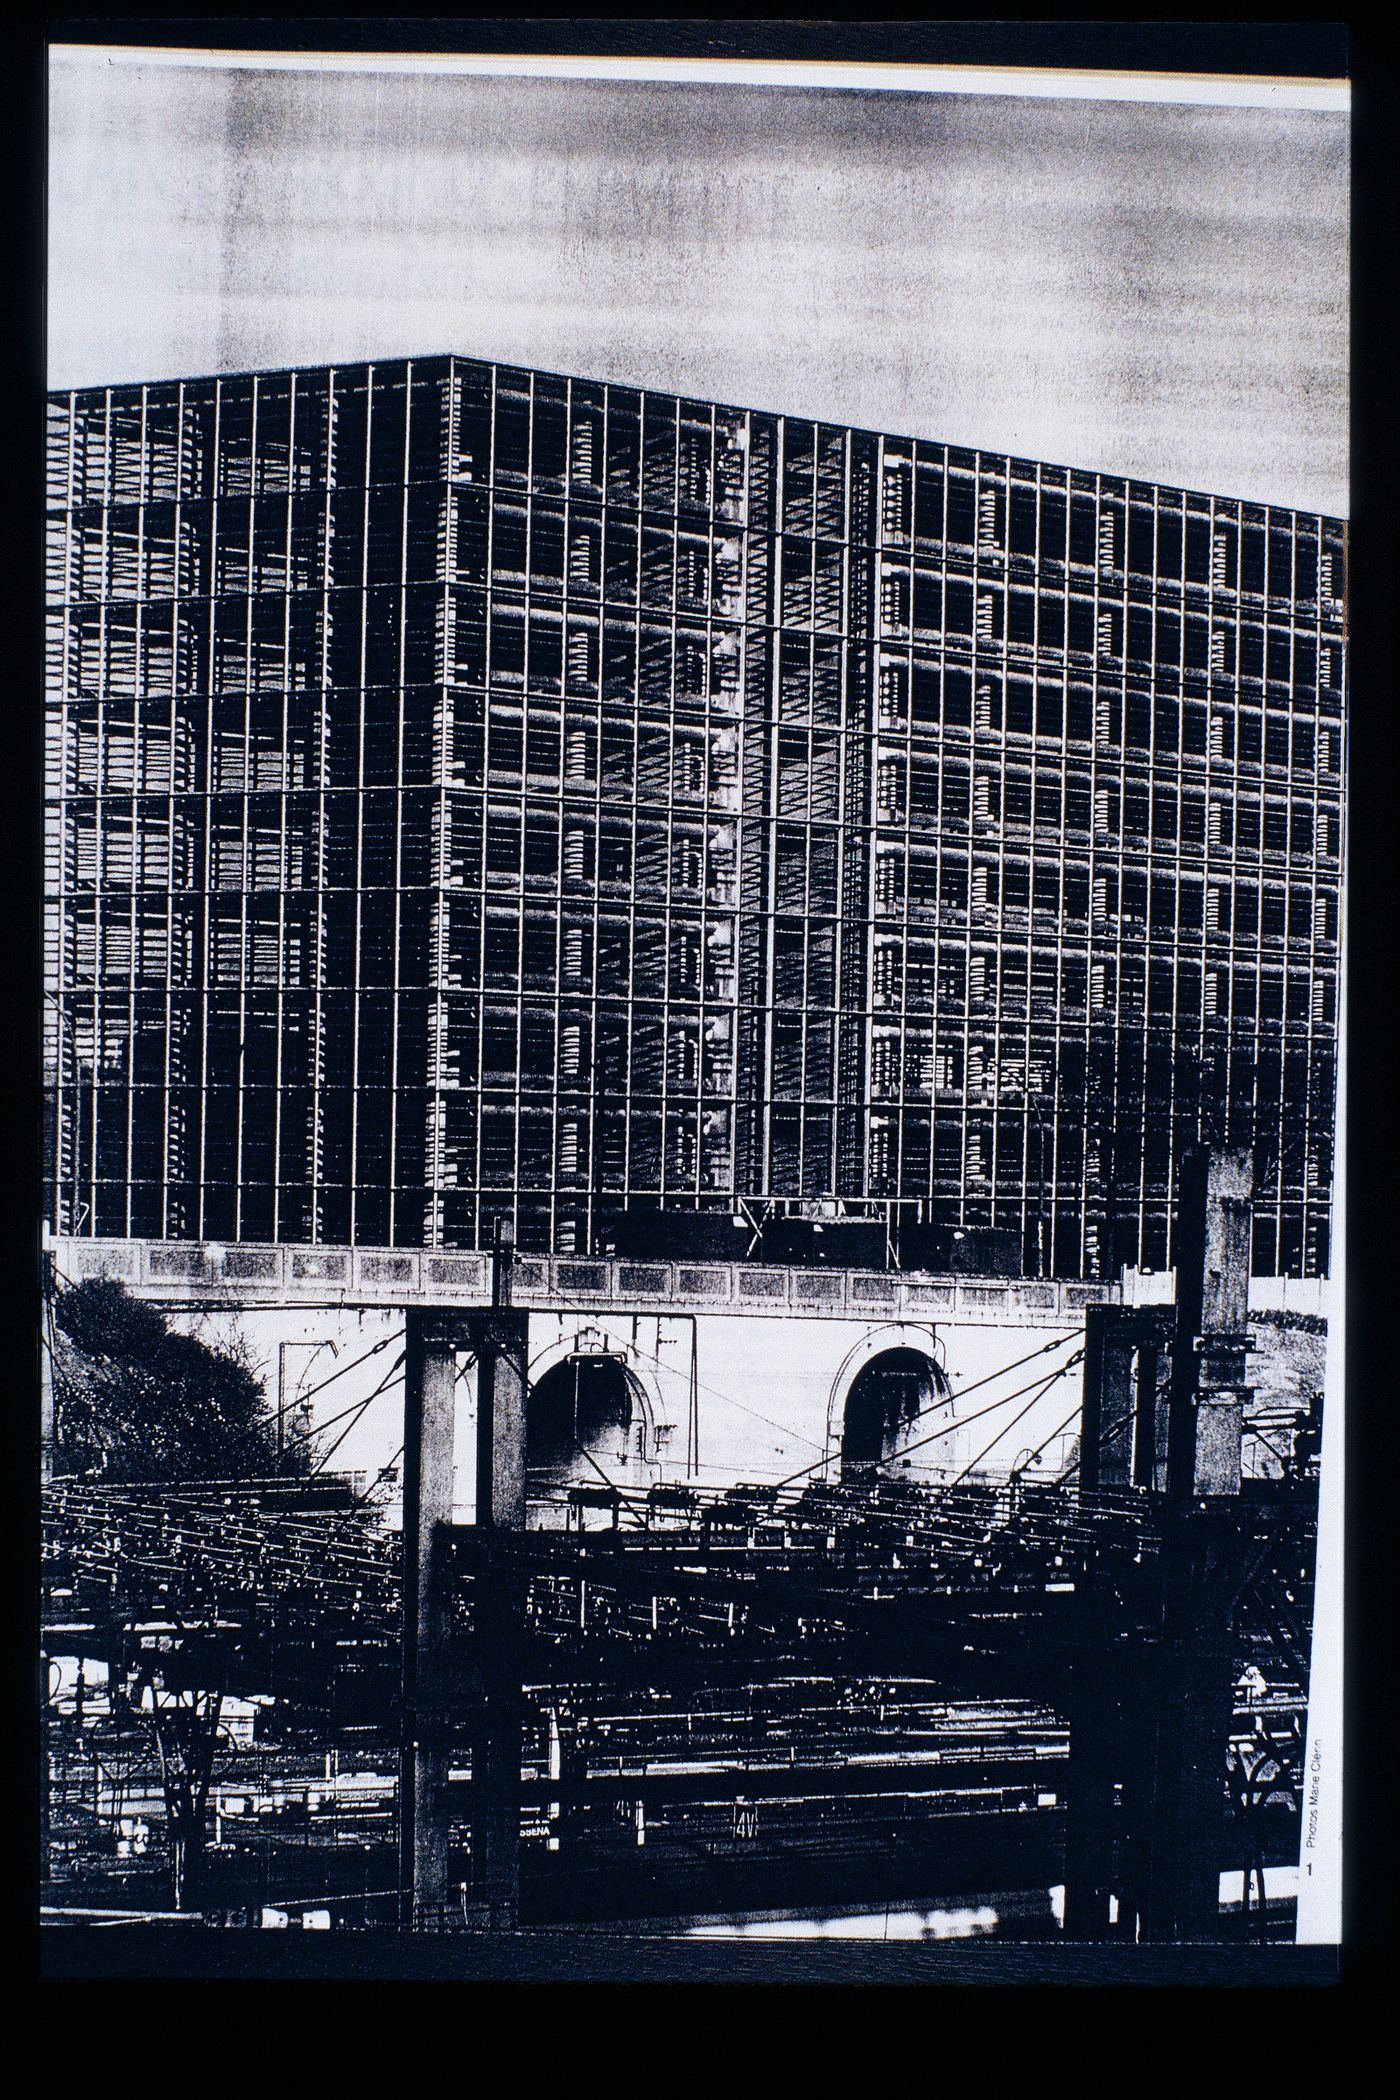 Slide of a photograph of Industrial Hotel, Paris, by Dominique Perrault